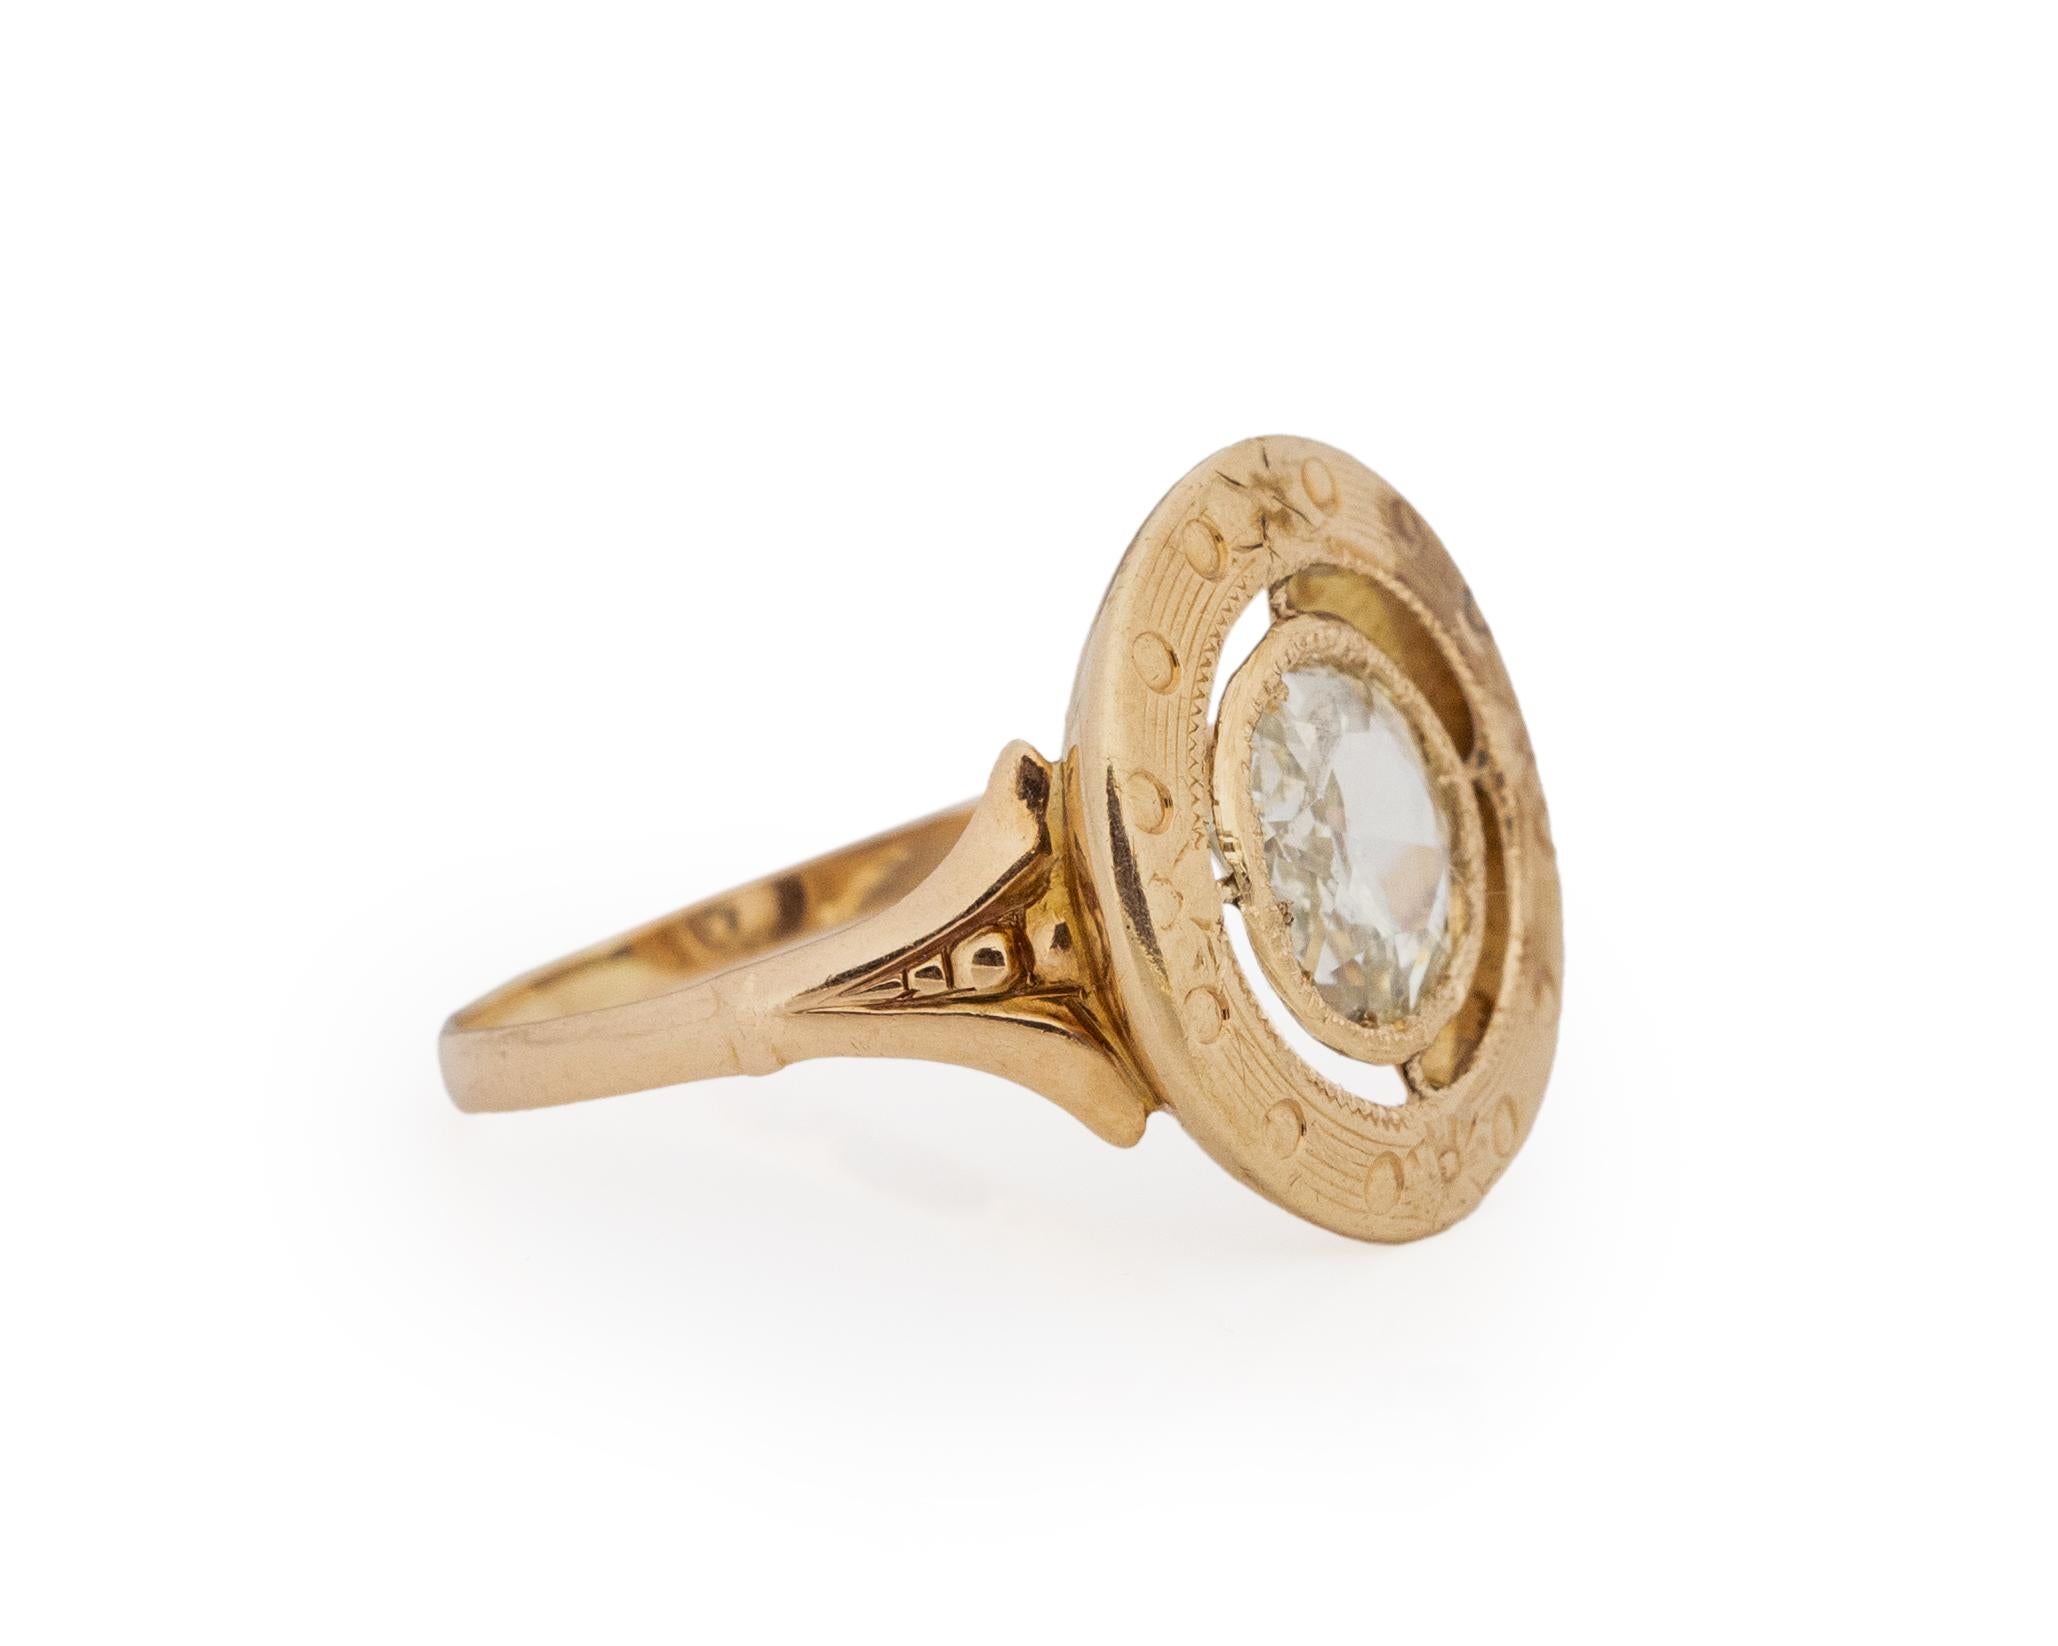 Ring Size: 6.75
Metal Type: 14Karat Yellow Gold [Hallmarked, and Tested]
Weight: 3.0 grams

Center Diamond Details:
Weight: 1.13carat
Cut: Rose Cut
Color: L/M
Clarity: VS1

Finger to Top of Stone Measurement: 3mm
Condition: Excellent